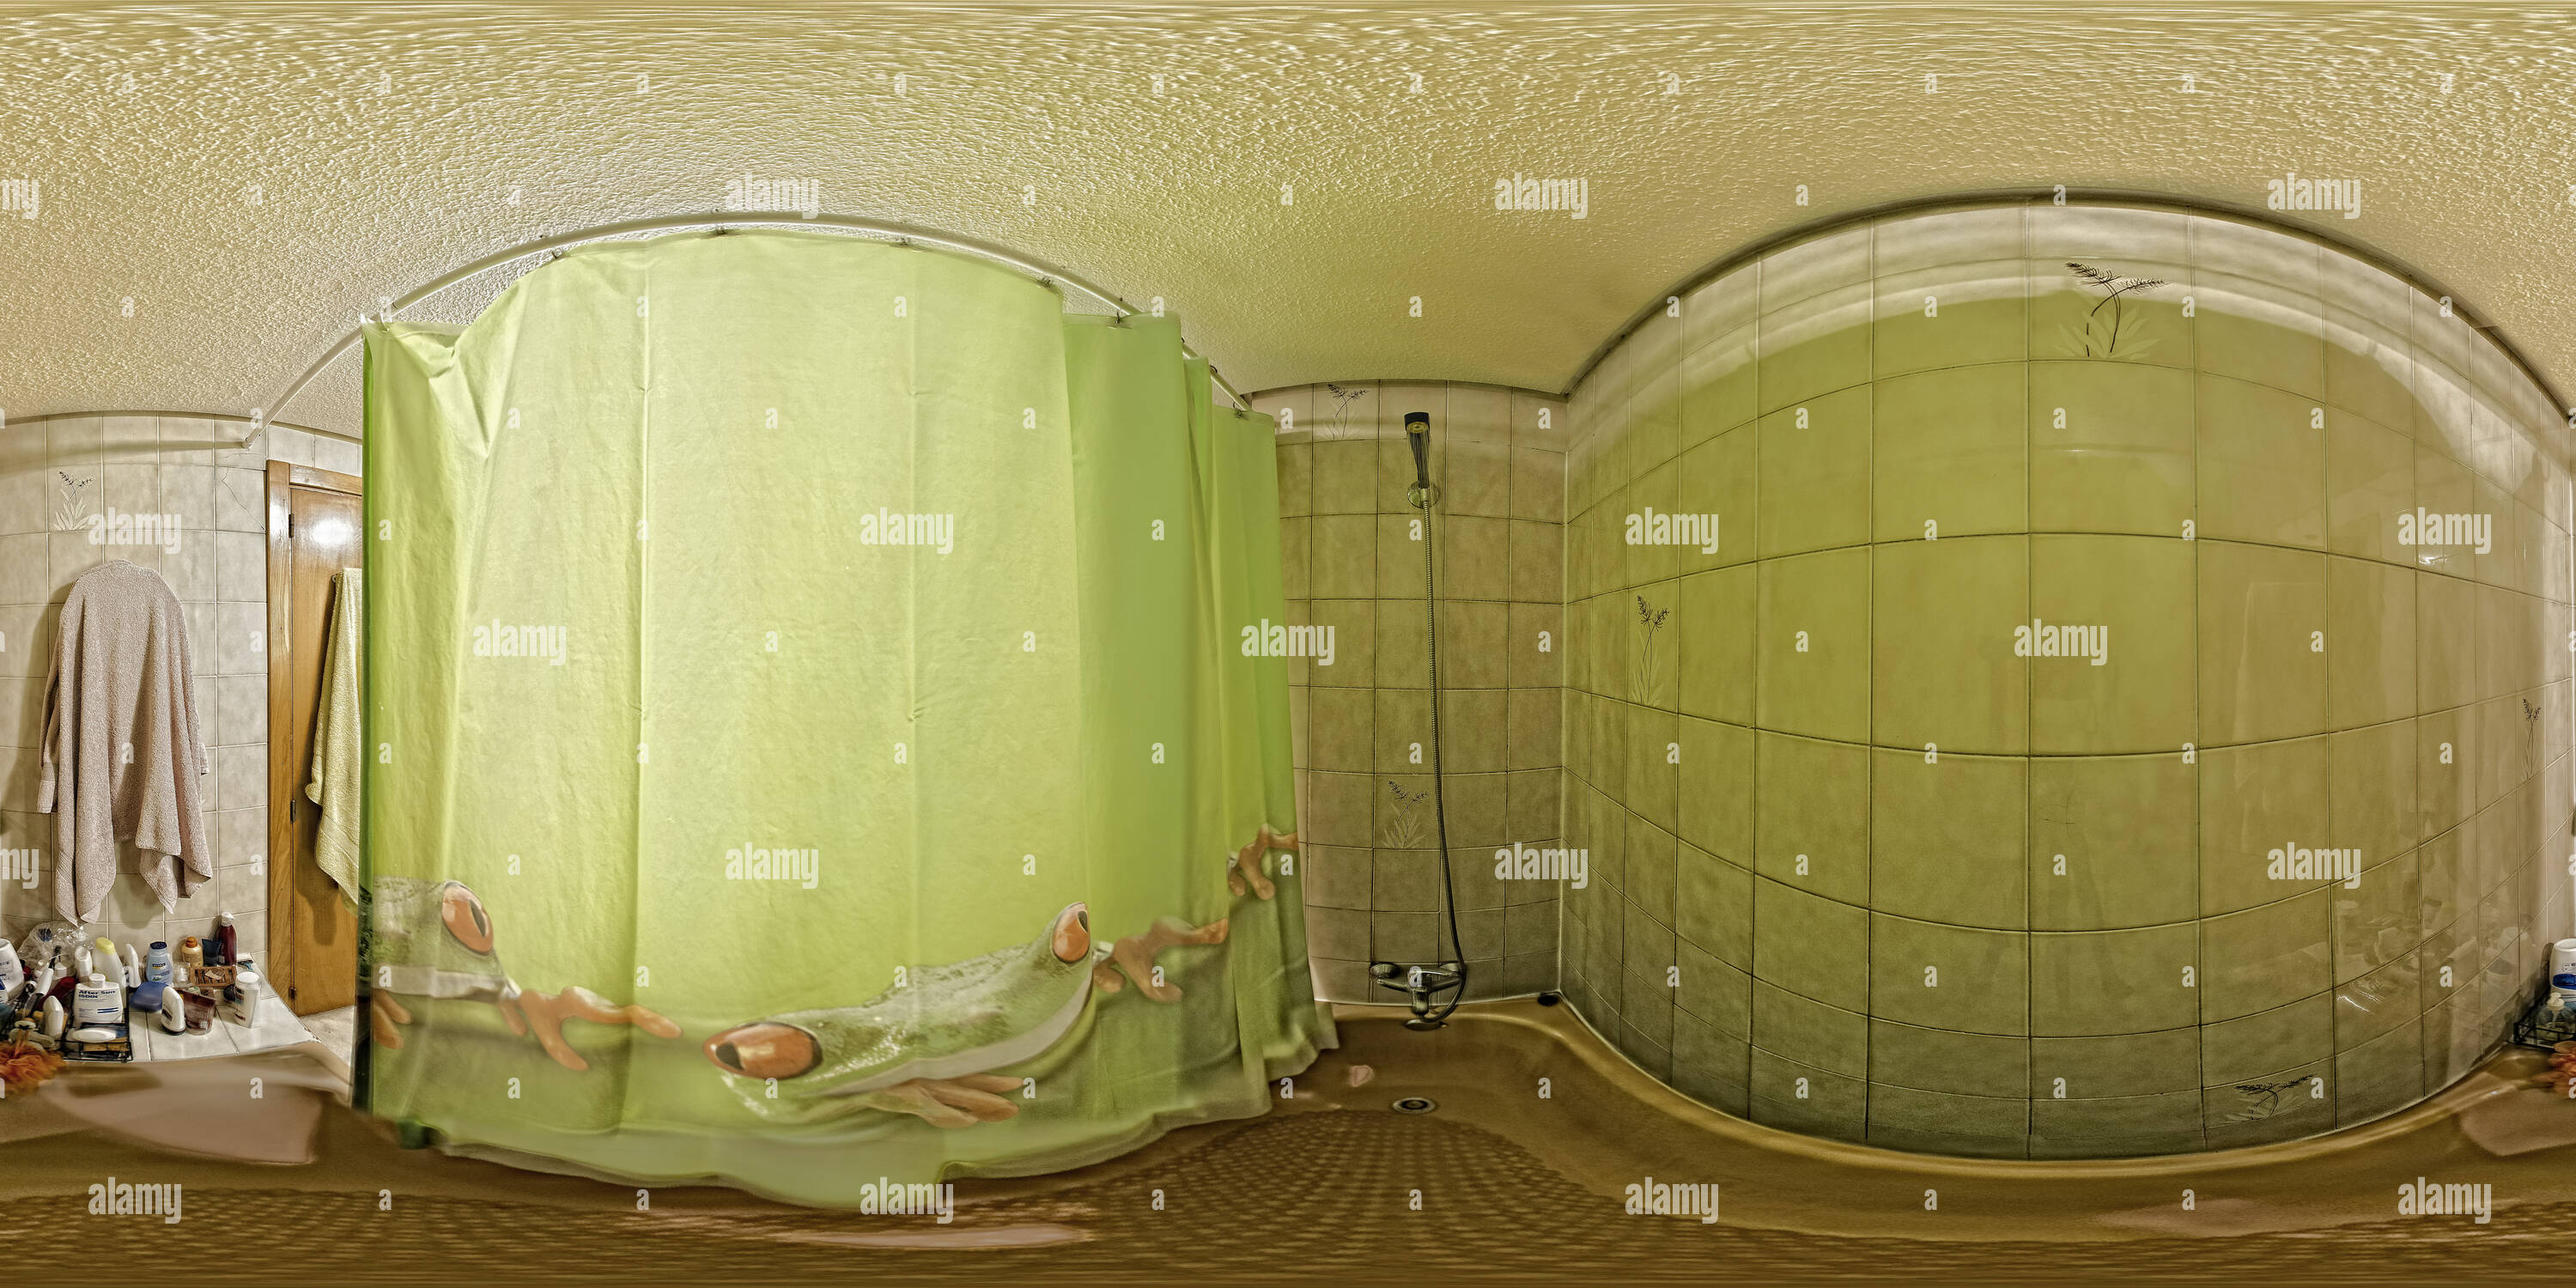 360° View Of Taking A Shower Alamy